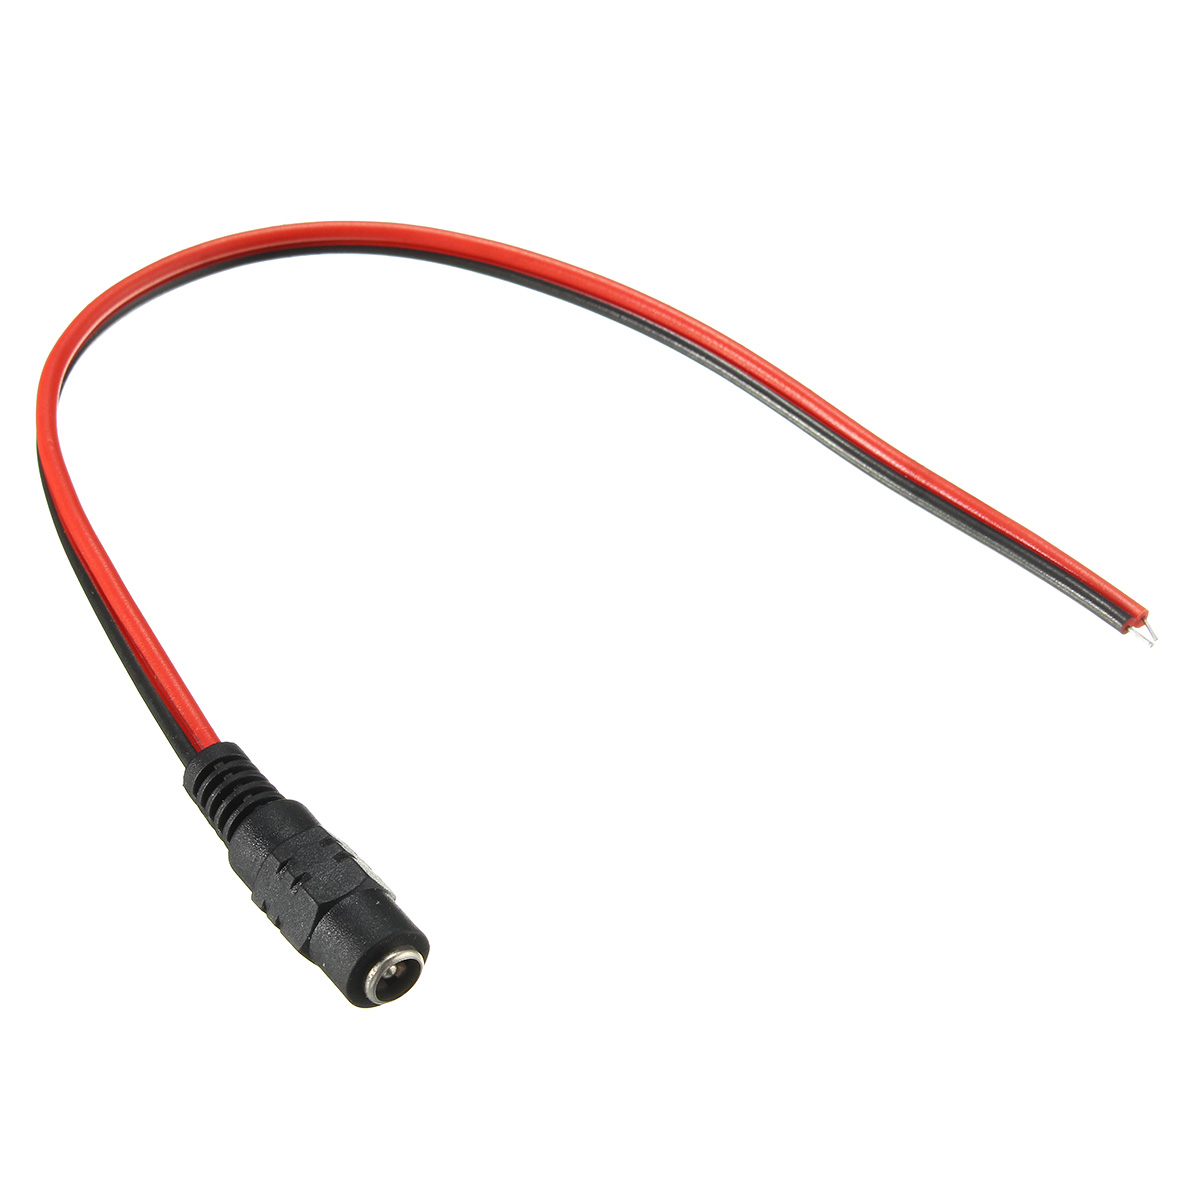 50PCS-LUSTREON-DC12V-Female-Power-Supply-Jack-Connector-Cable-Plug-Cord-Wire-55mm-x-21mm-1369197